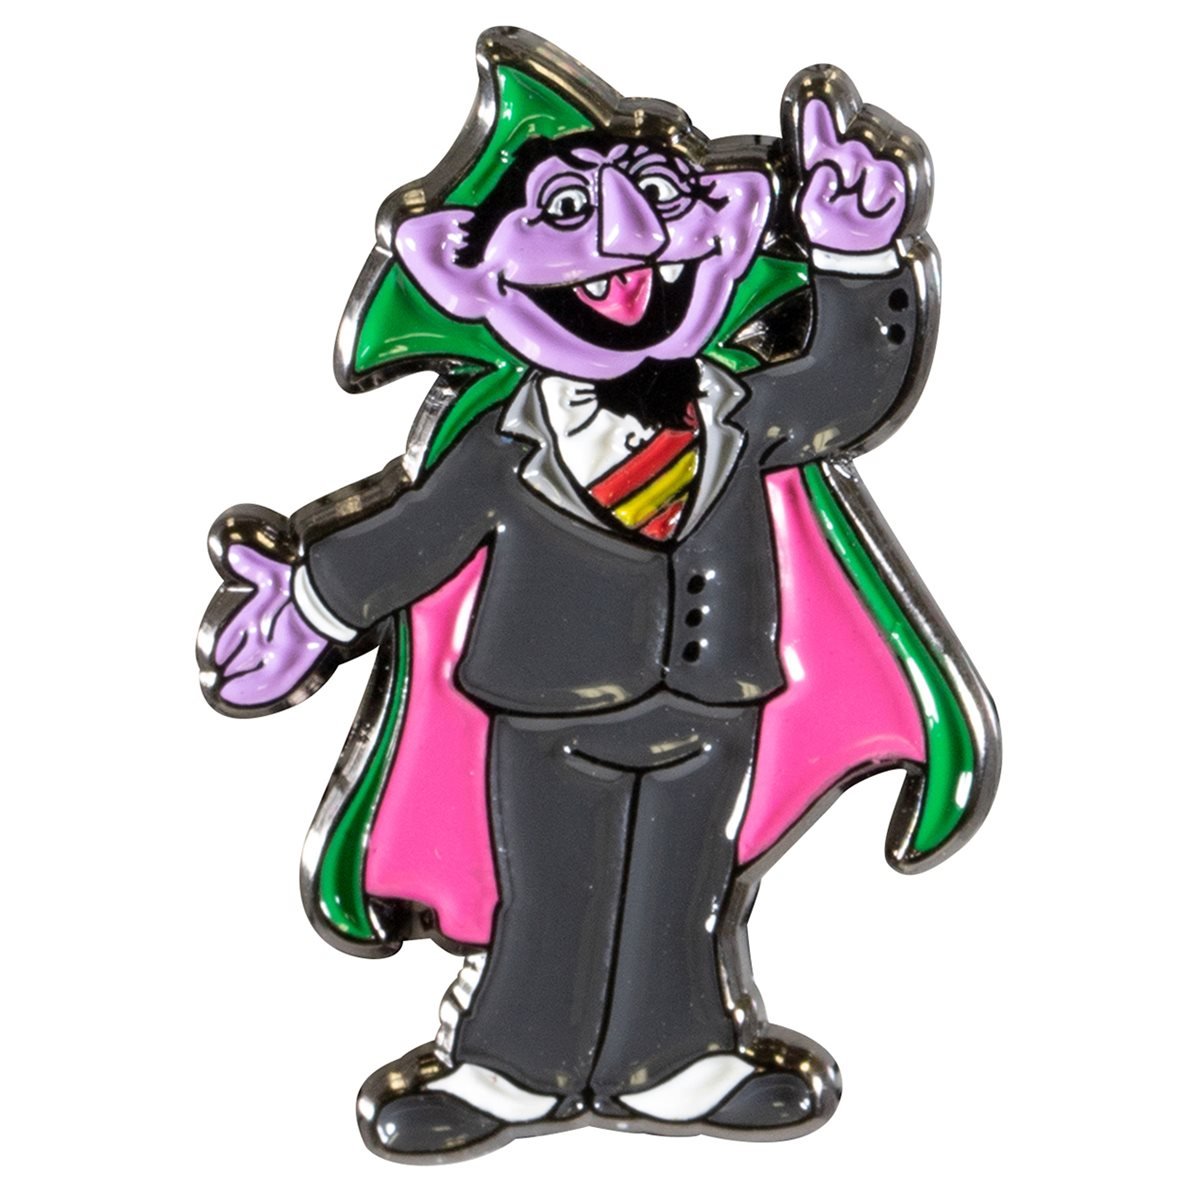 sesame street the count clipart